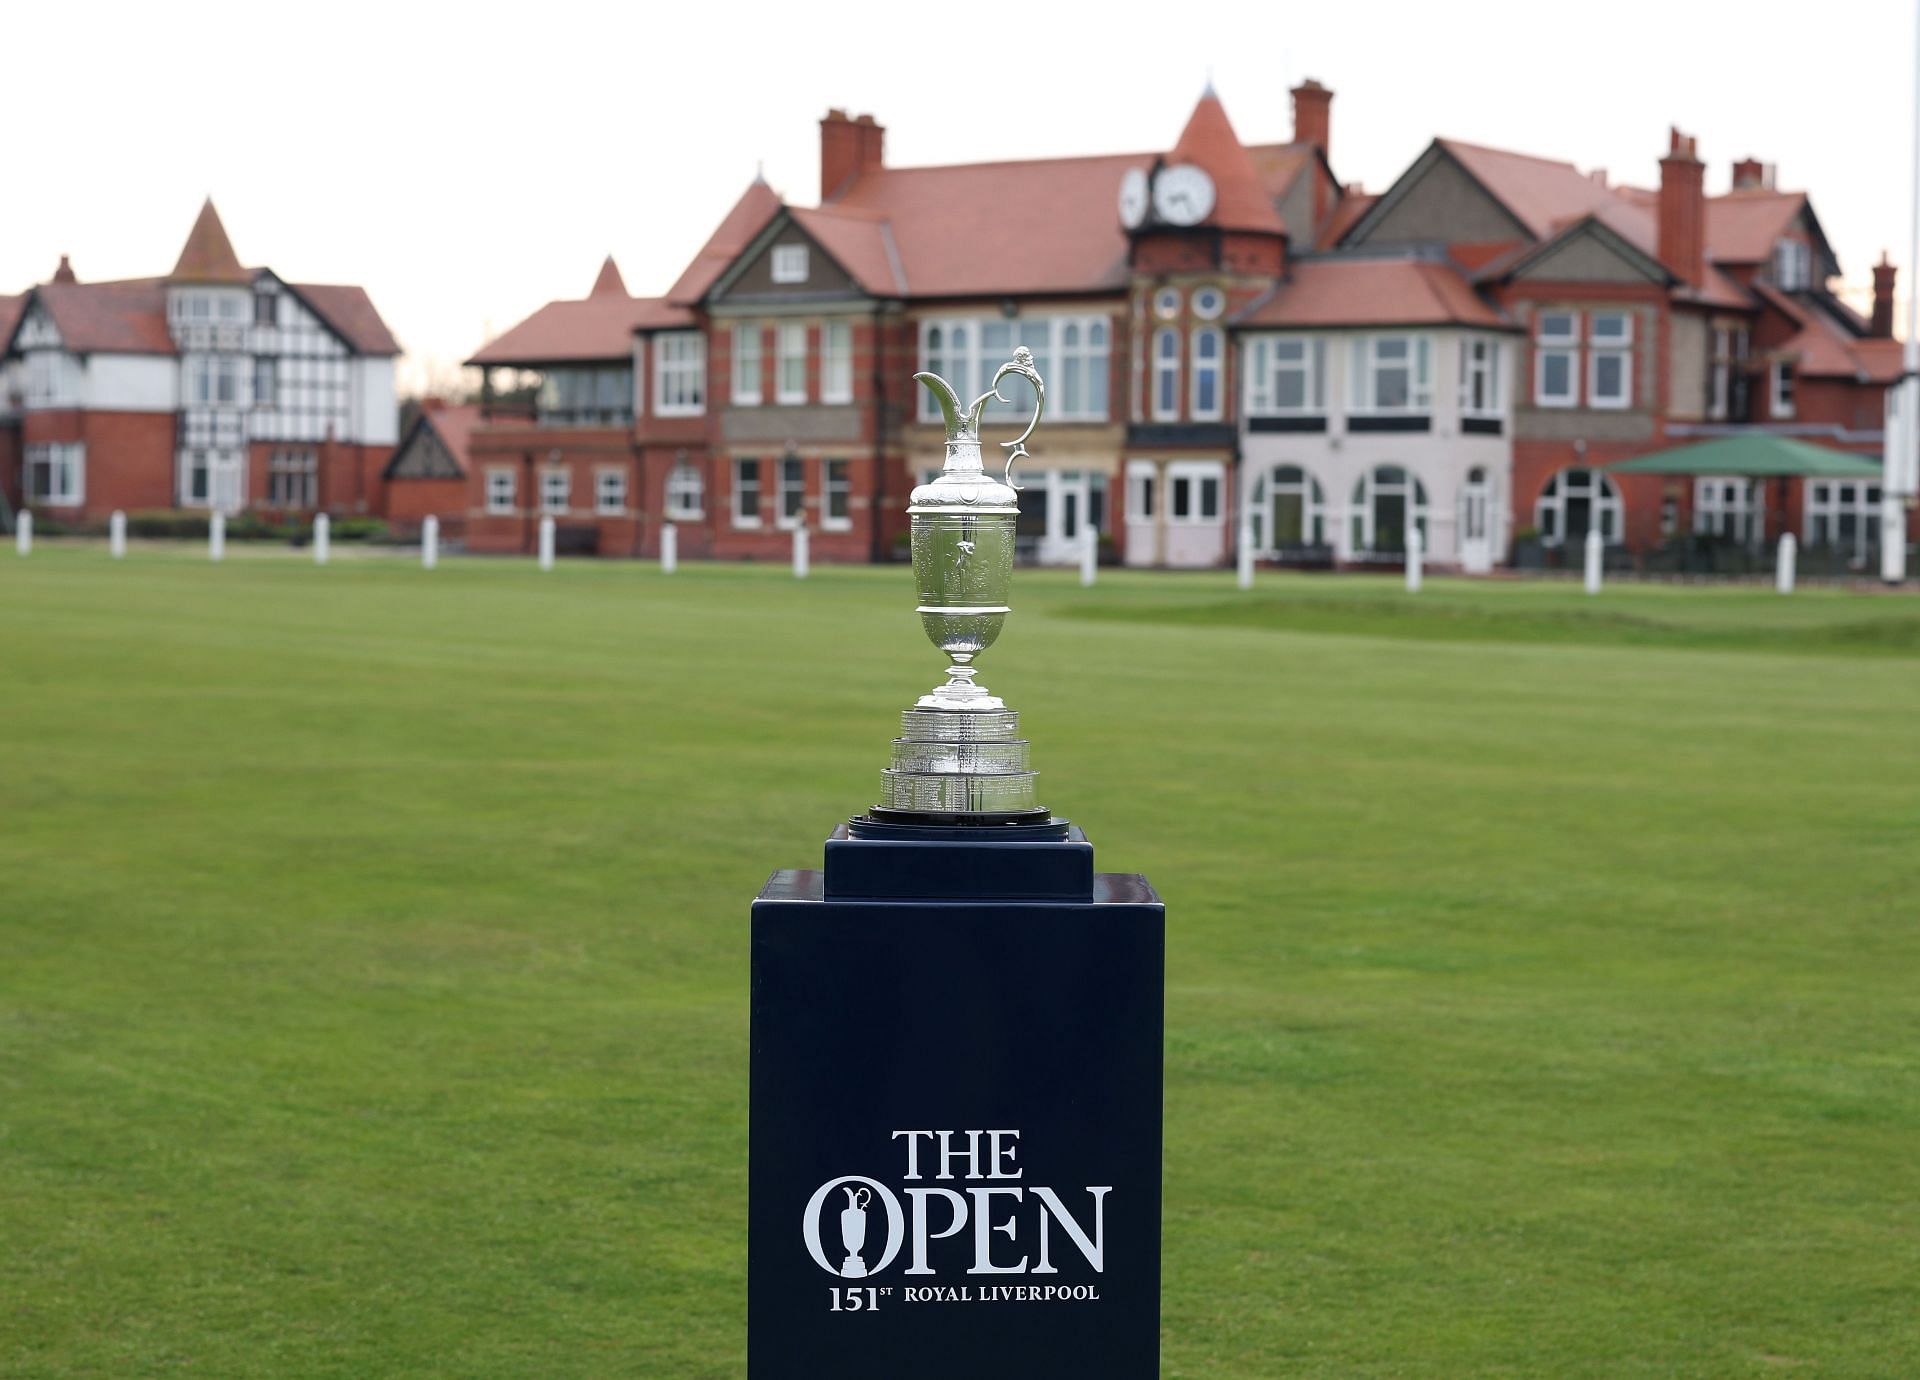 A view of the Claret Jug at Royal Liverpool Golf Club for The 151st Open Championship (via Getty Images)